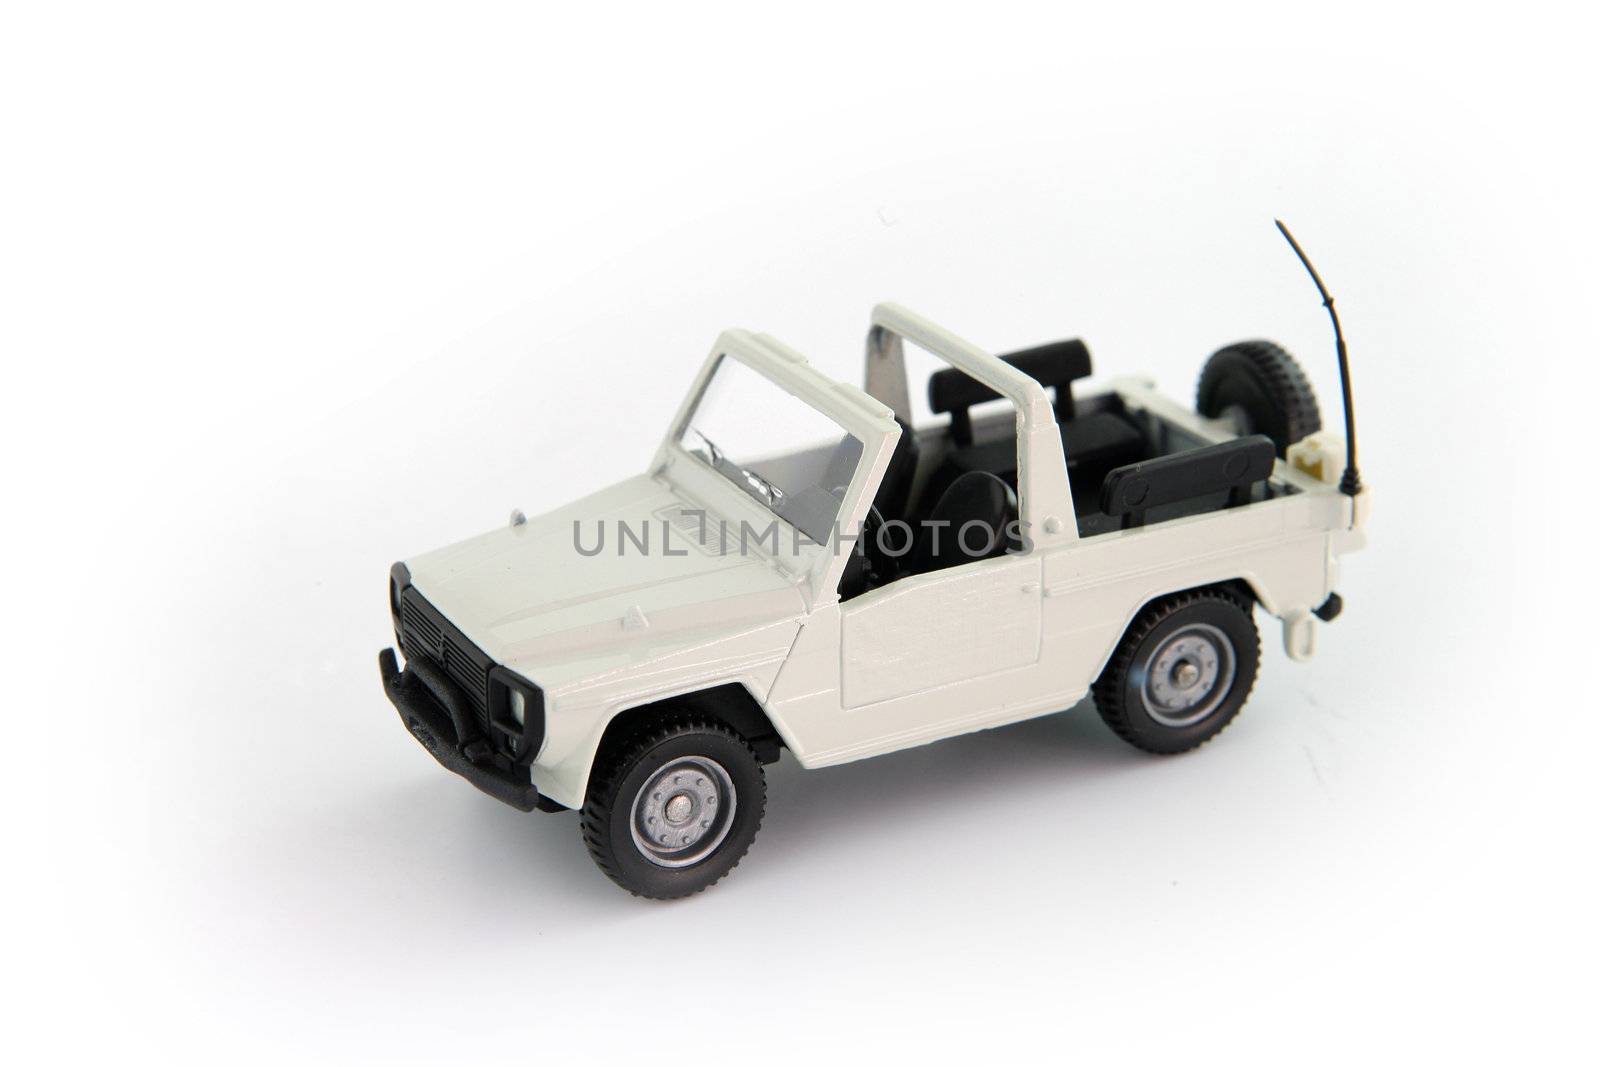 Toy jeep by phovoir